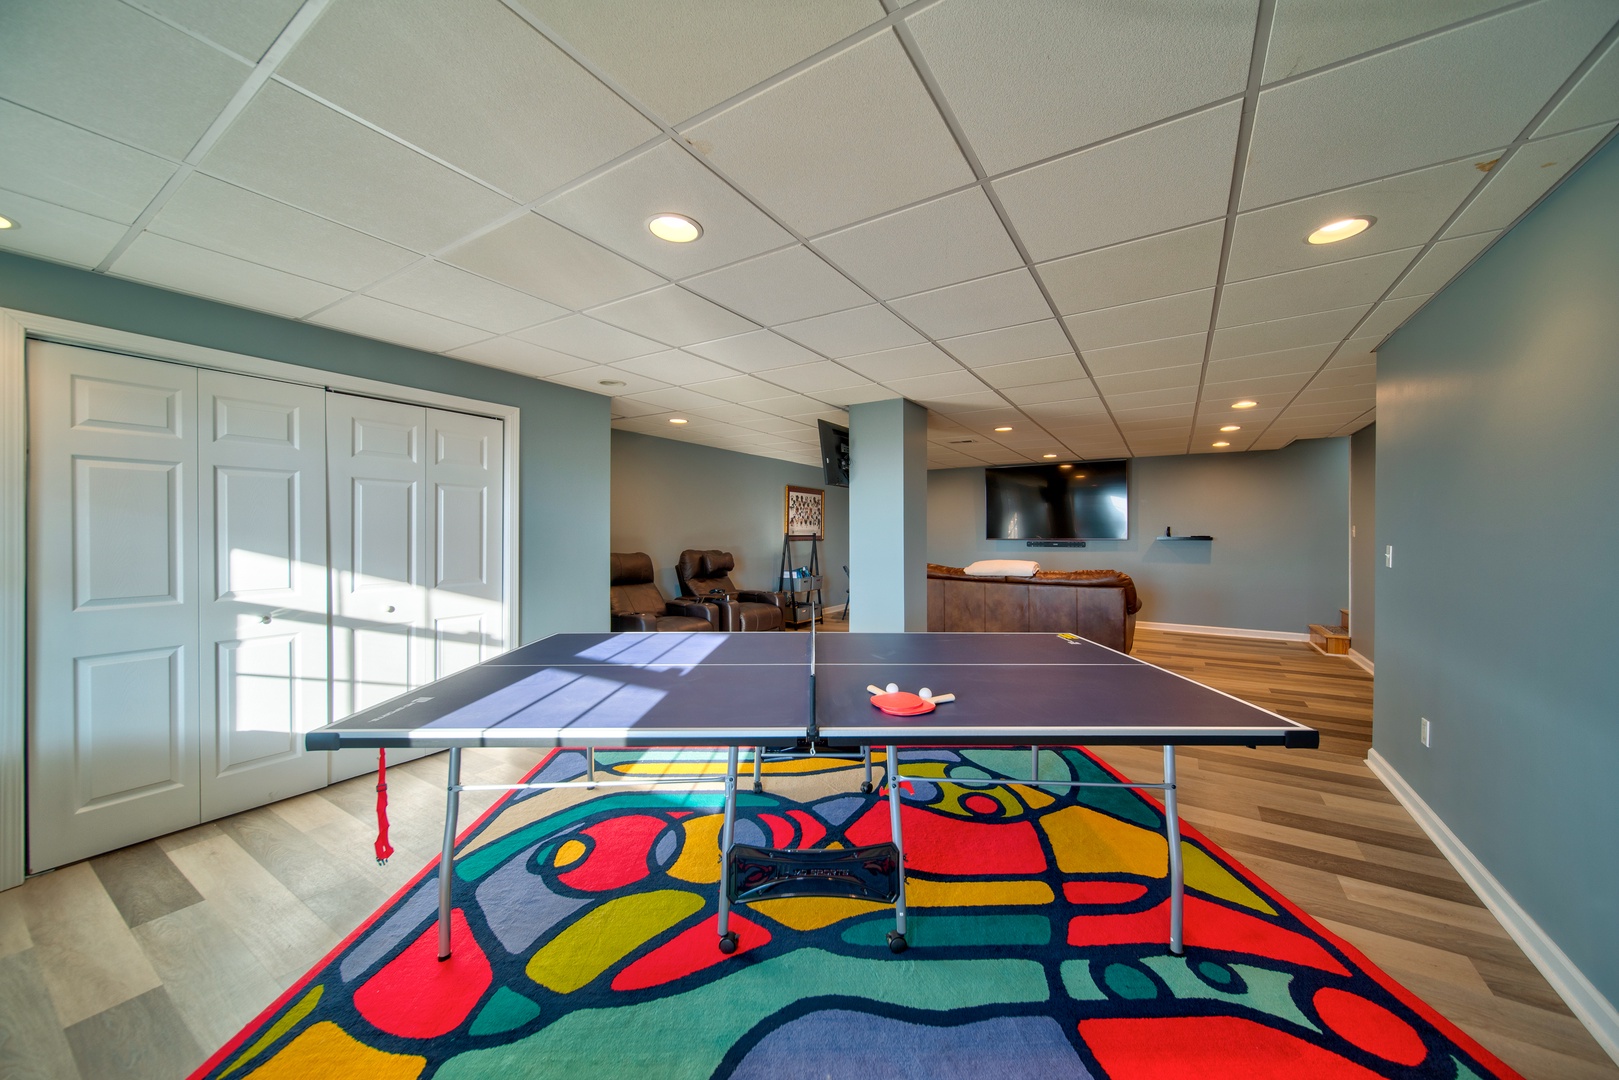 Break out the paddles & enjoy a round of Ping-Pong!